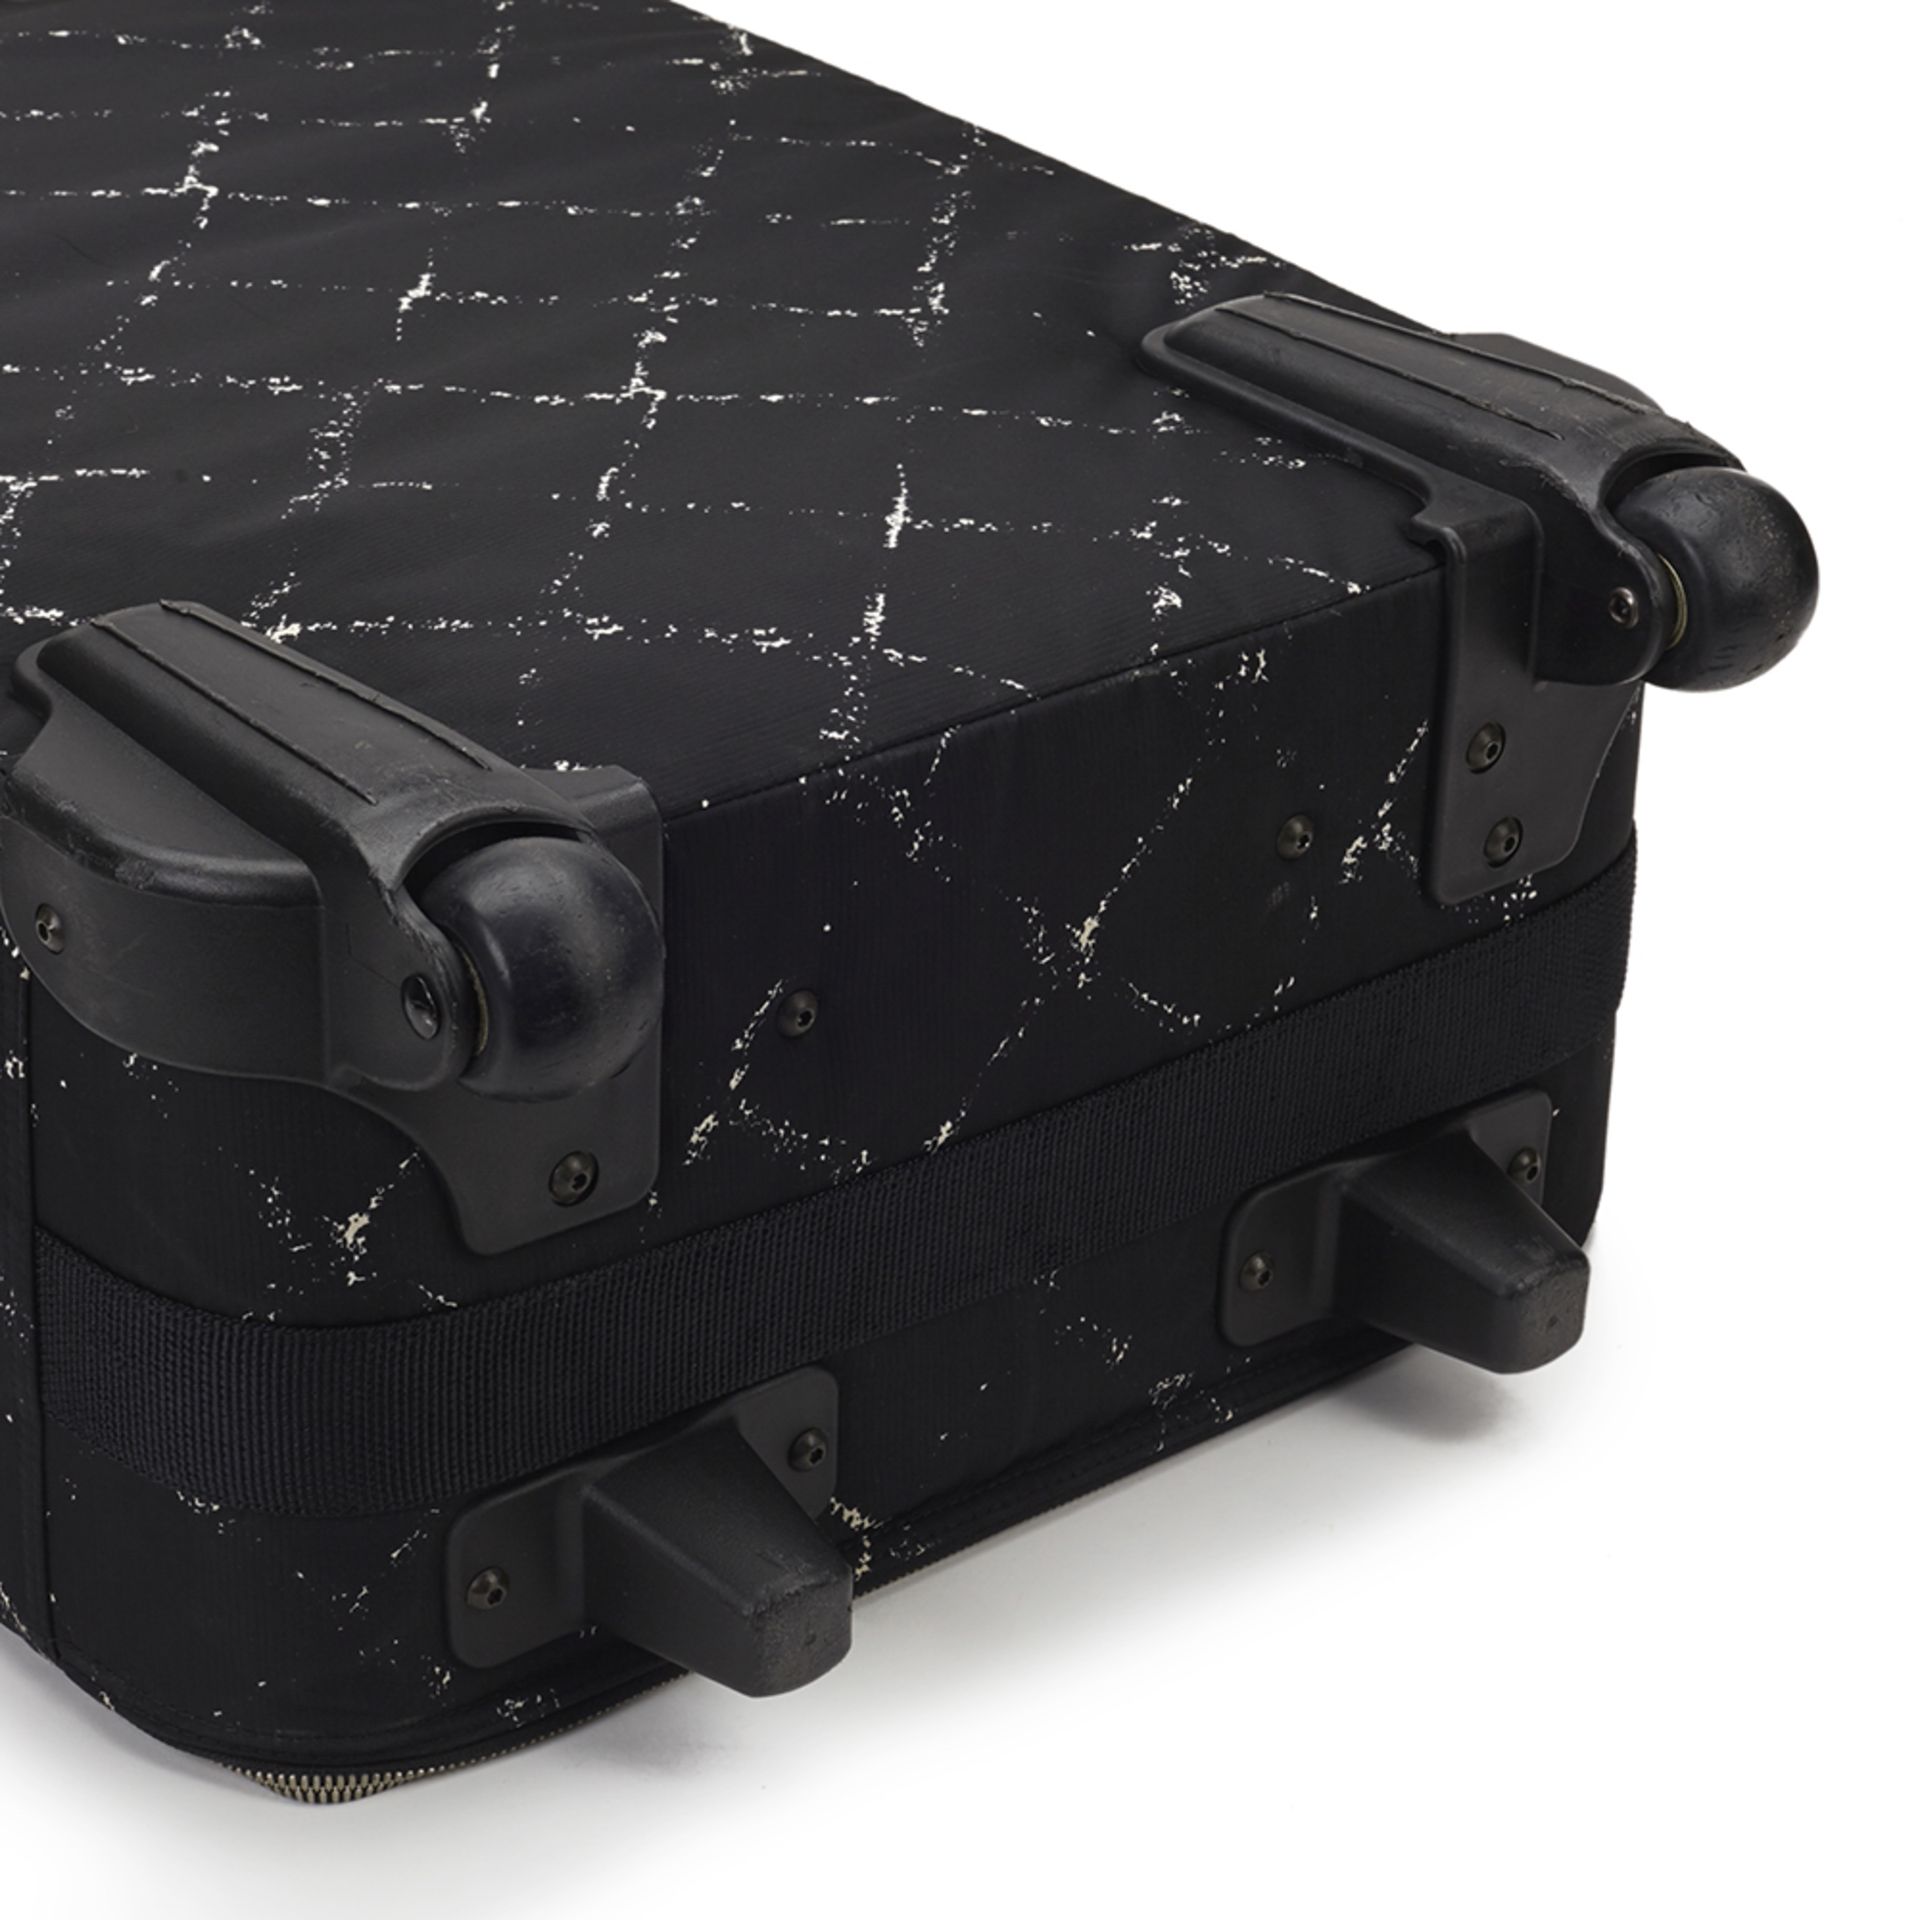 Chanel Rolling Case - Image 8 of 10